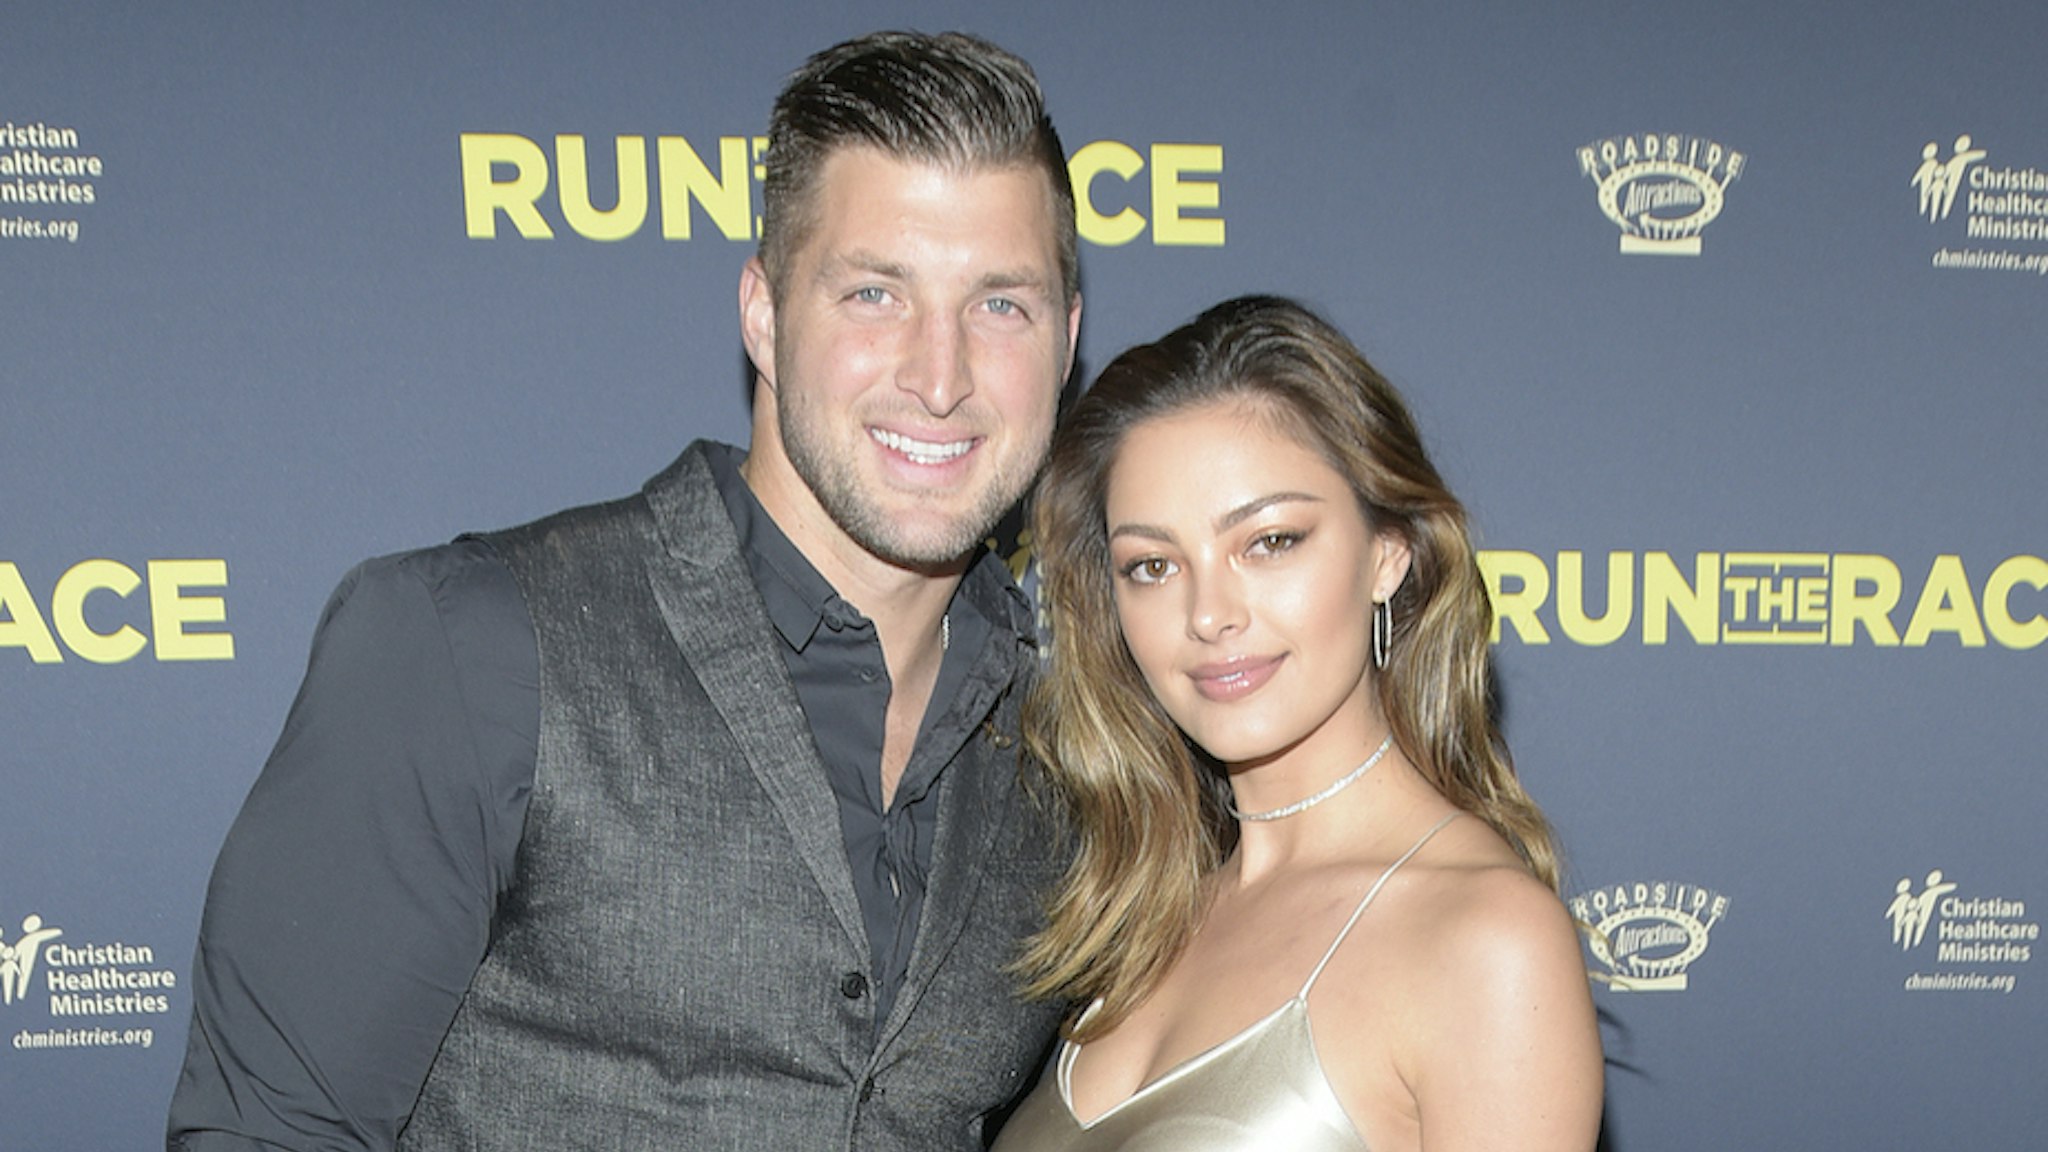 Tim Tebow and Demi-Leigh Nel-Peters attend the premiere of Roadside Attractions' "Run The Race" at the Egyptian Theatre on February 11, 2019 in Hollywood, California. (Photo by Michael Tullberg/Getty Images)